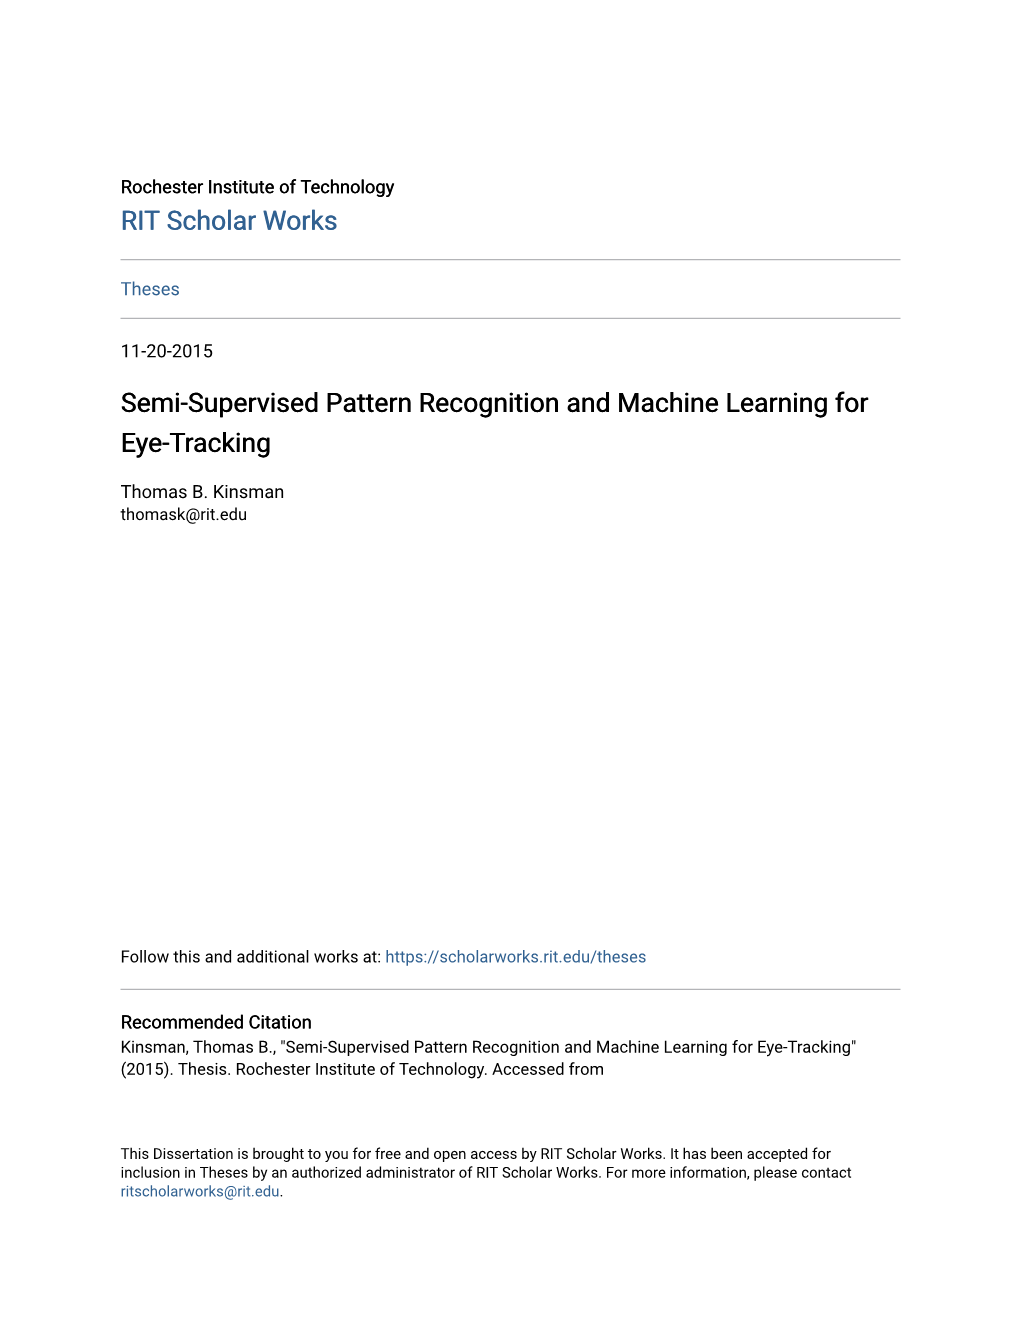 Semi-Supervised Pattern Recognition and Machine Learning for Eye-Tracking